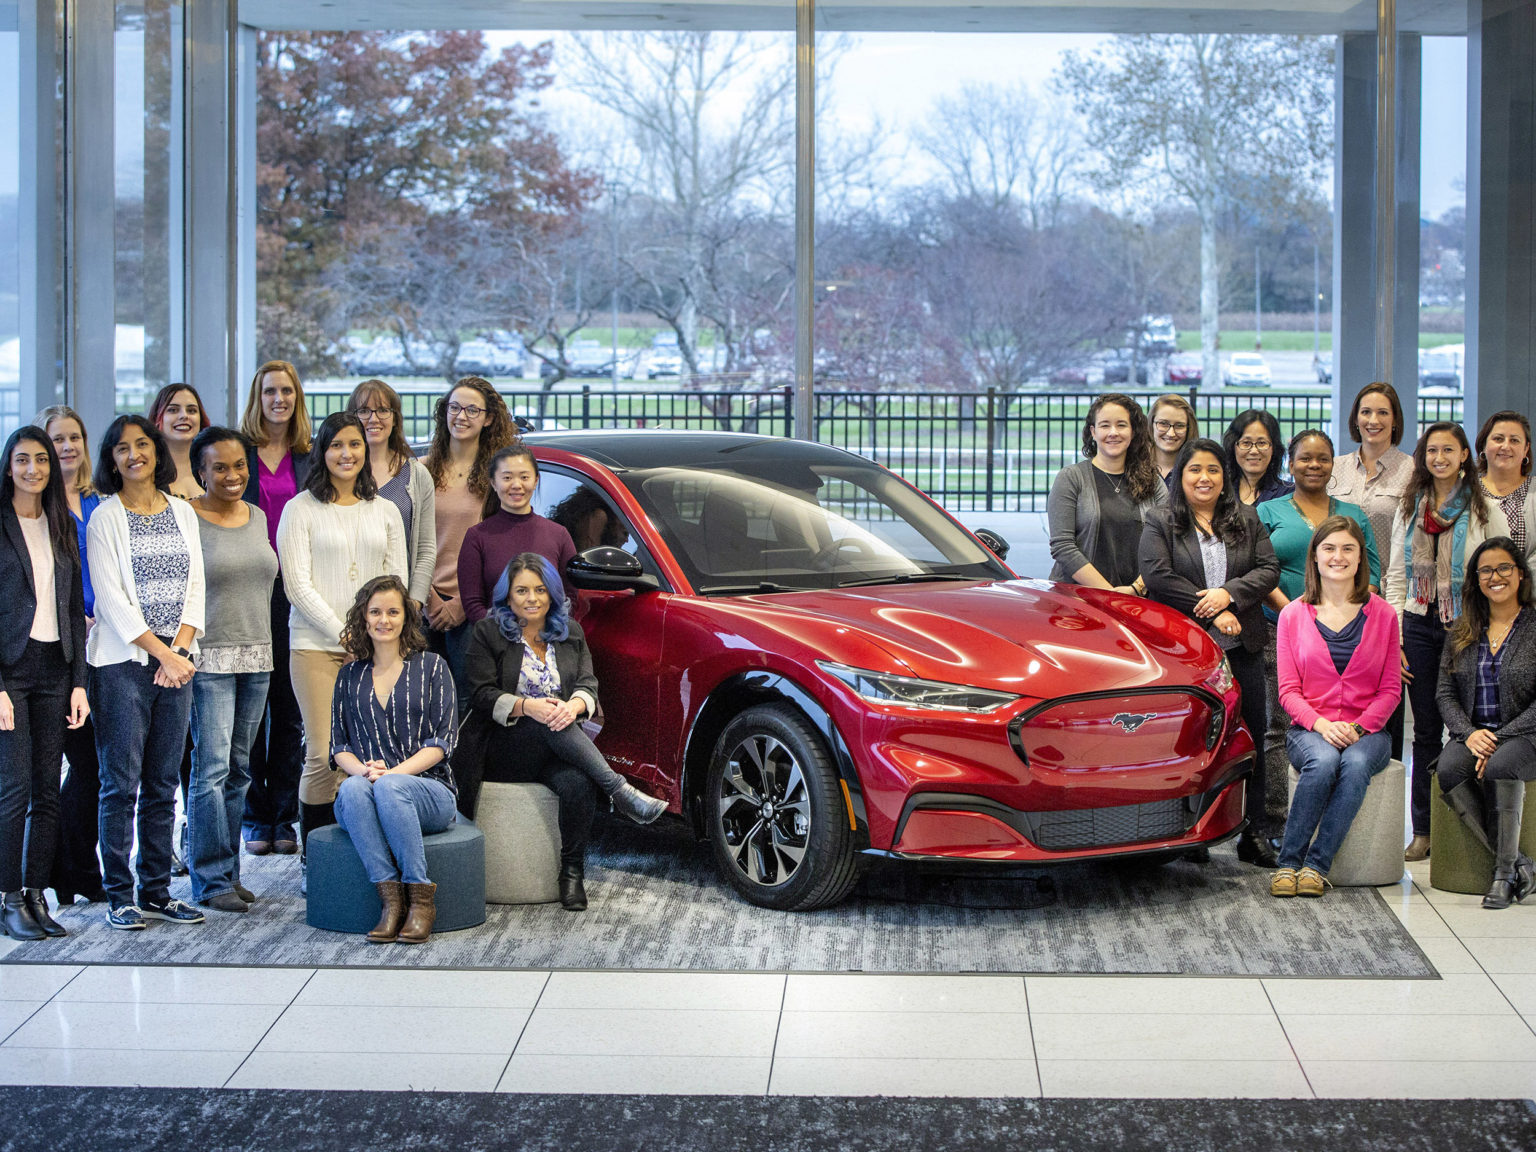 Ford's new tech team hires include a large number of women, something the company takes pride in.